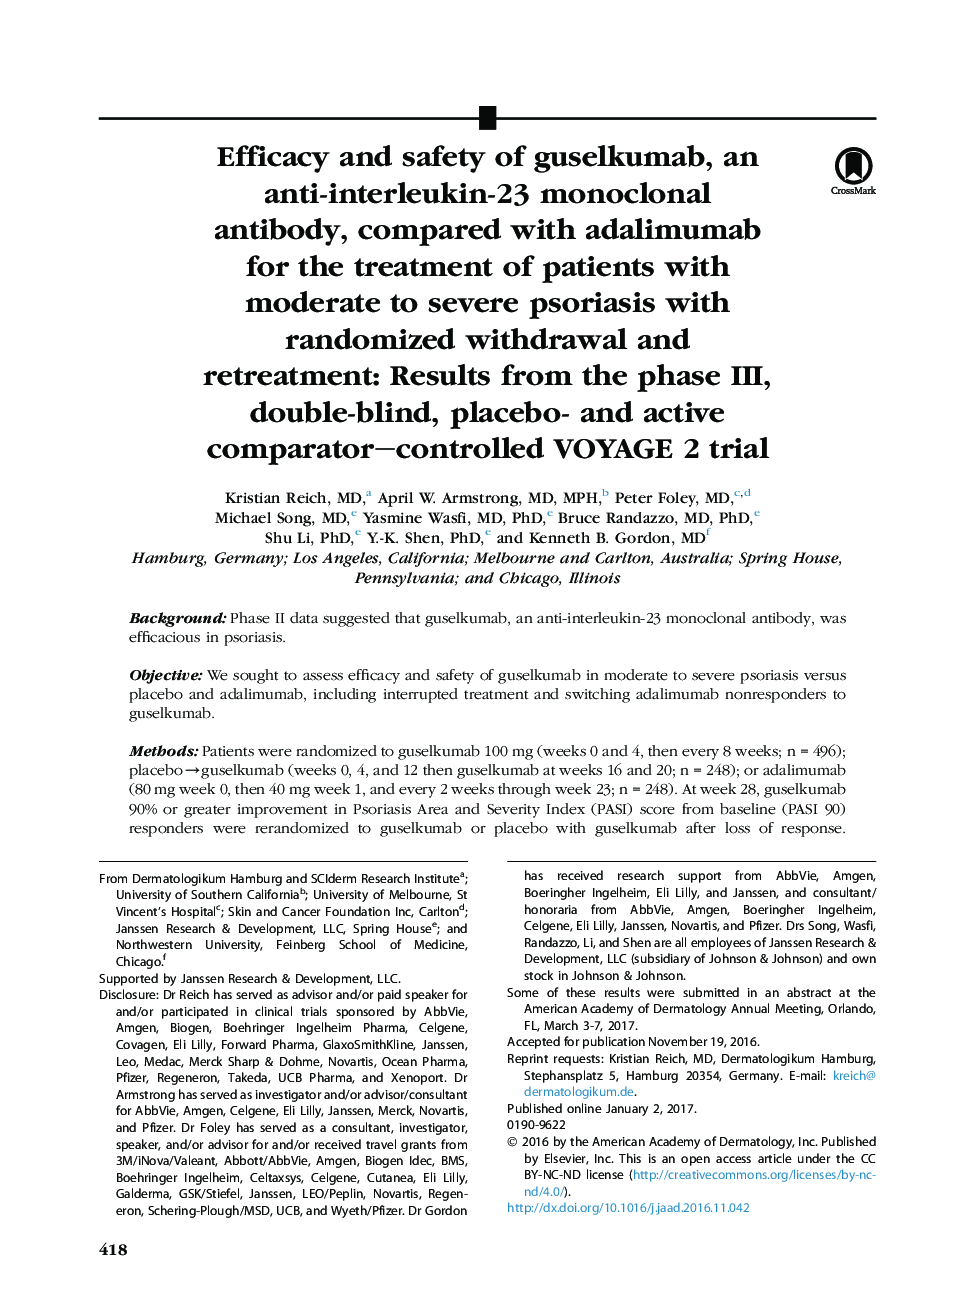 Efficacy and safety of guselkumab, an anti-interleukin-23 monoclonal antibody, compared with adalimumab for the treatment of patients with moderate to severe psoriasis with randomized withdrawal and retreatment: Results from the phase III, double-blind, p